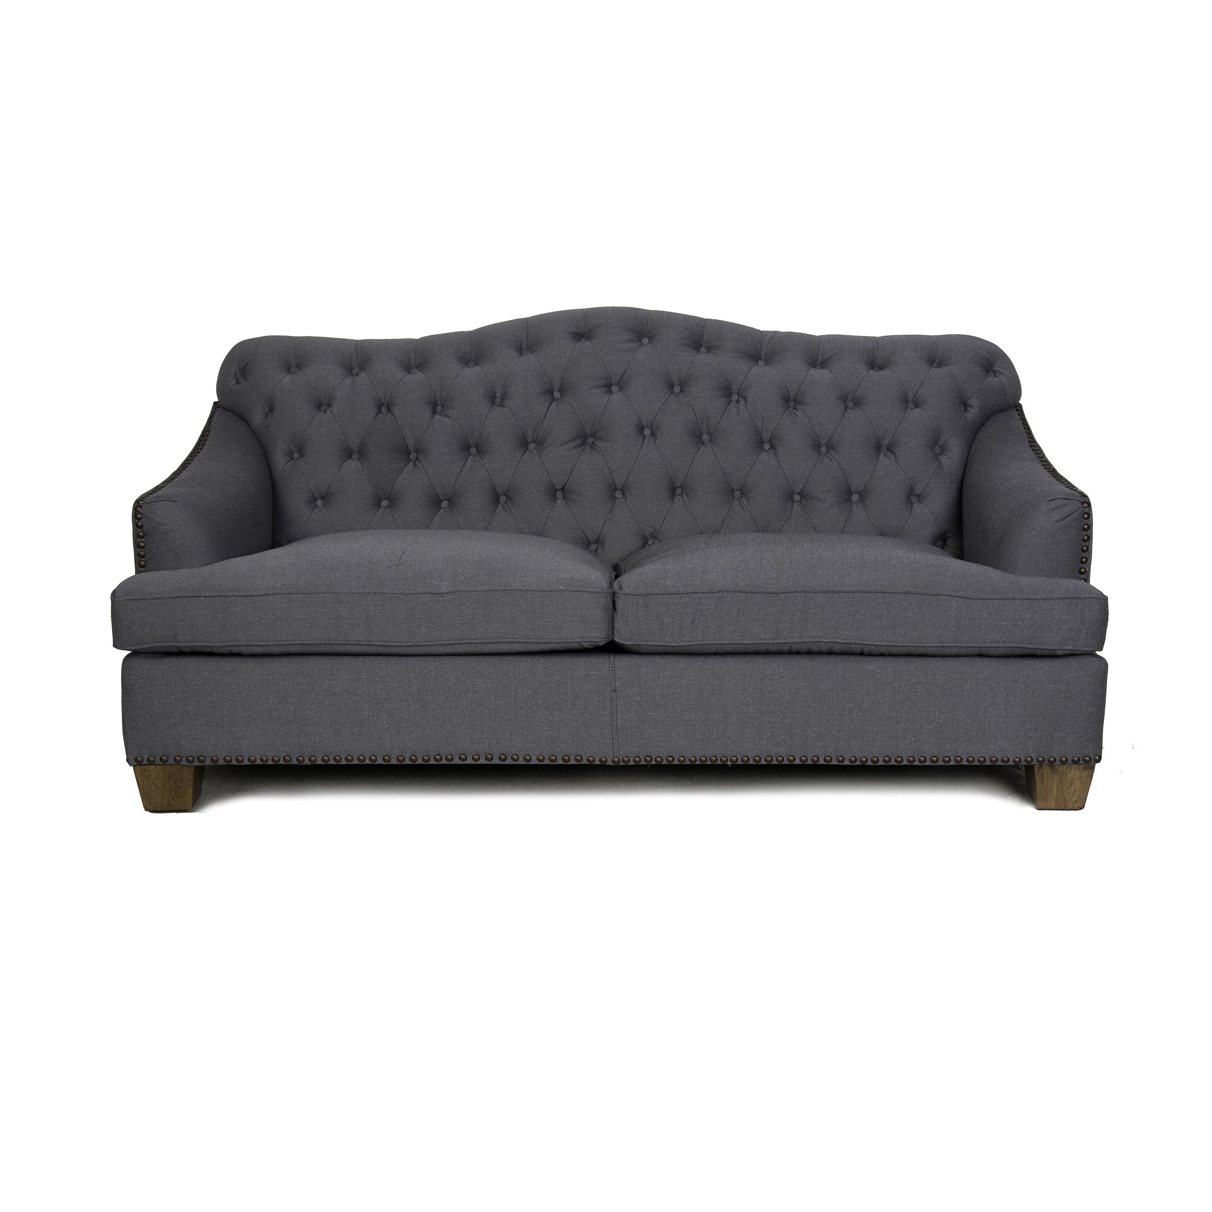 Preferred Light Charcoal Linen Sofas With Bardot Tufted Sofa With Nailheads – Charcoal (View 13 of 15)